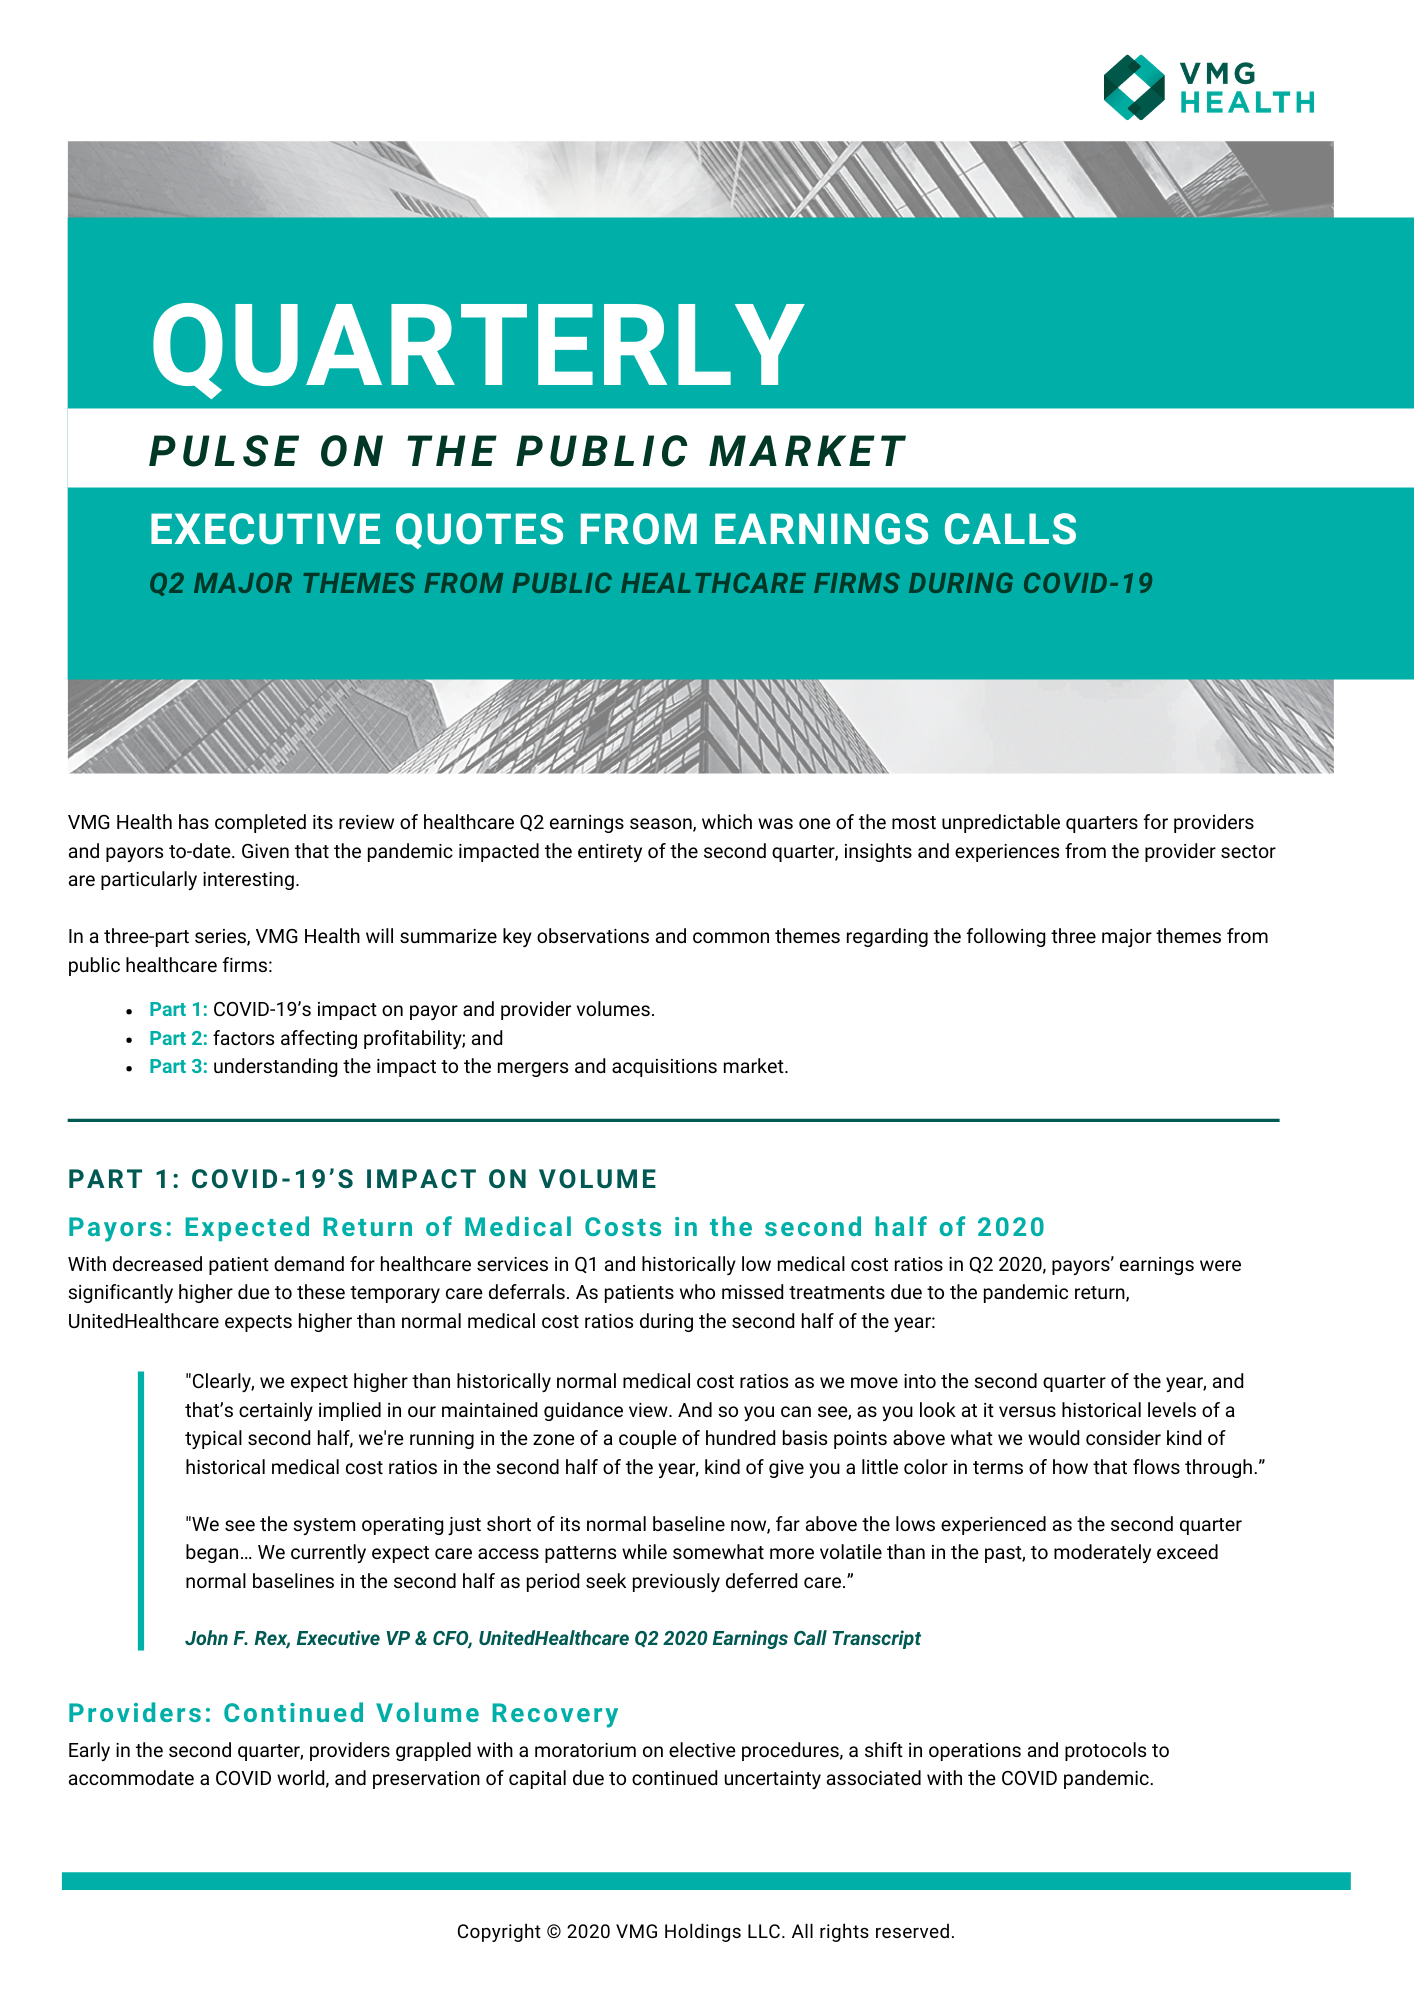 Q2 EXECUTIVE QUOTES FROM EARNINGS CALLS: 3 MAJOR THEMES FROM PUBLIC HEALTHCARE FIRMS DURING COVID-19